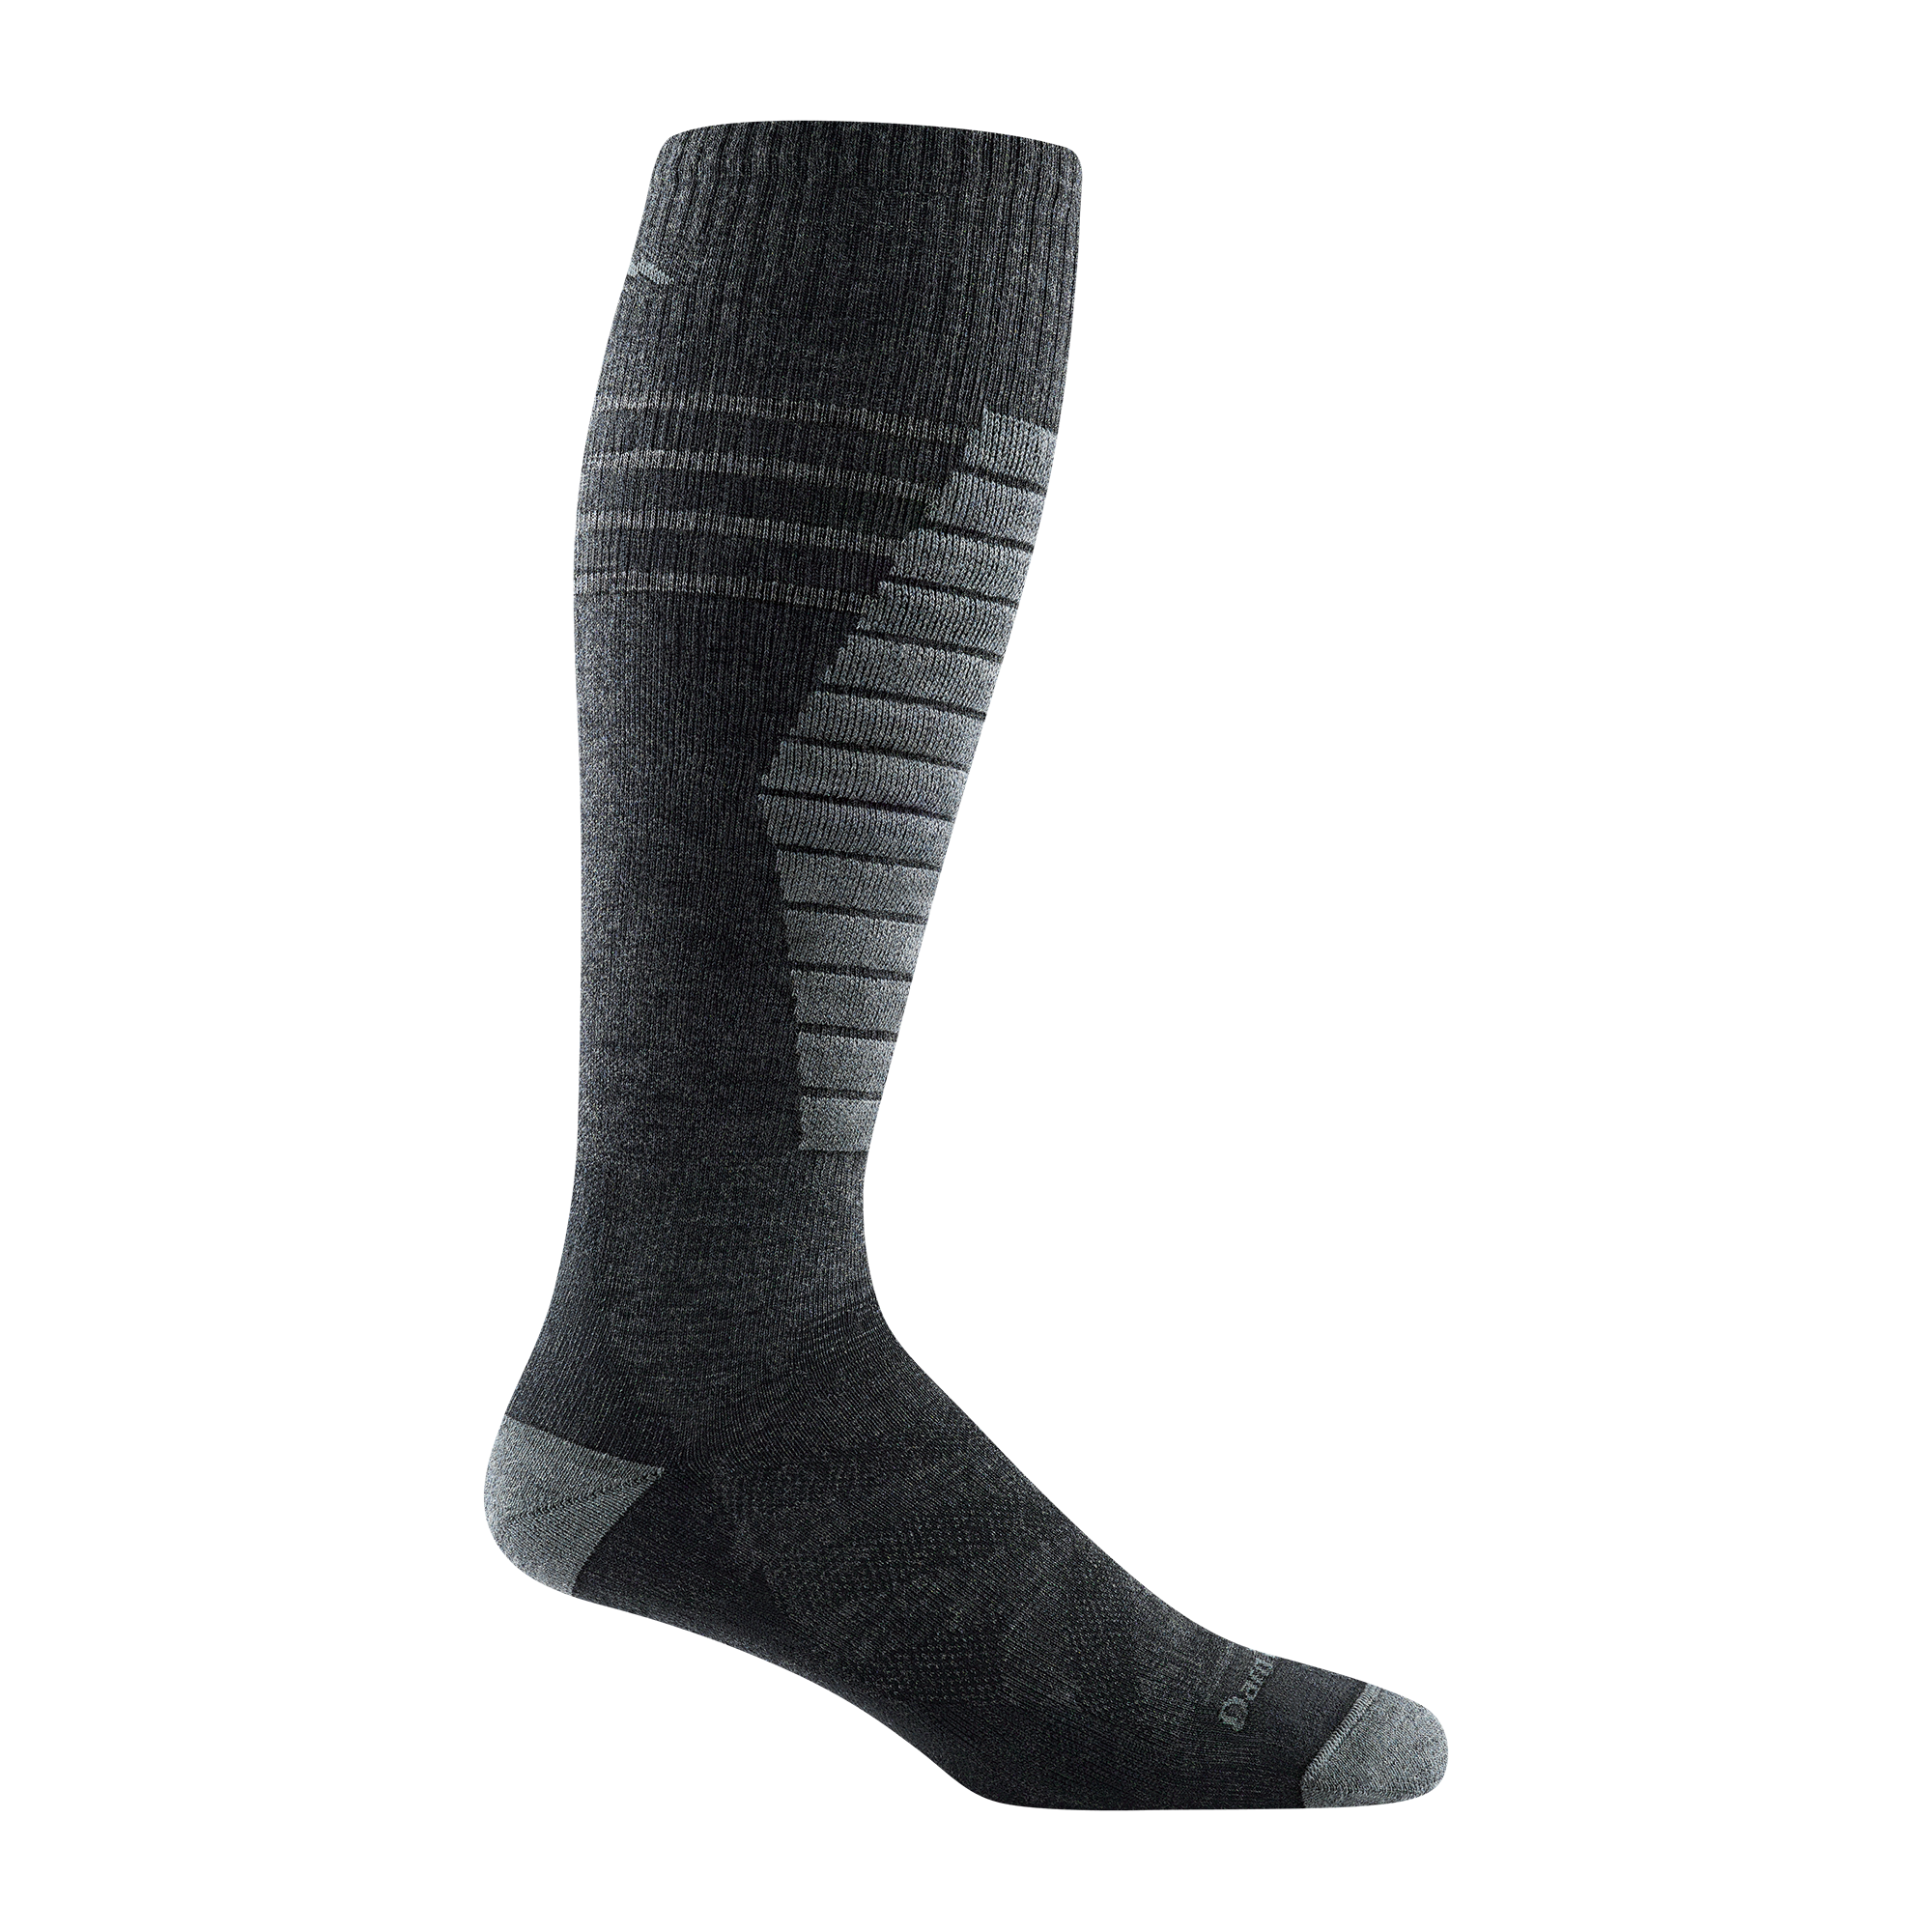 8007 men's edge over-the-calf ski sock in charcoal with light gray toe/heel accents and shin striping